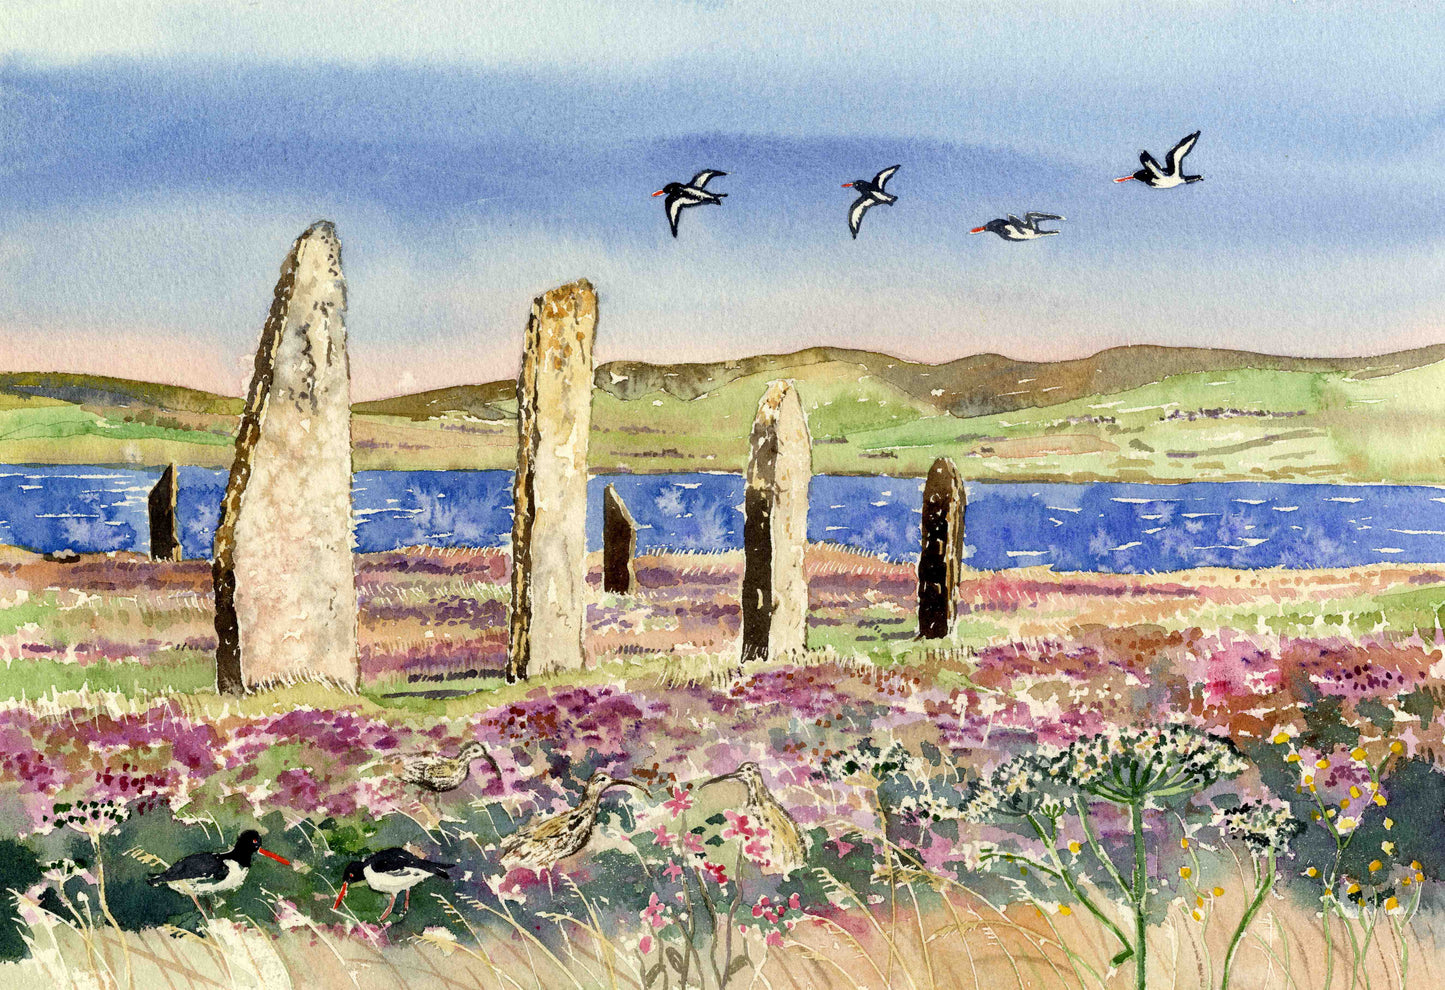 a watercolour painting of the ring of brodgar in Orkney with Harray loch in the background, oystercatchers flying in the sky and curlews in the purple heather below